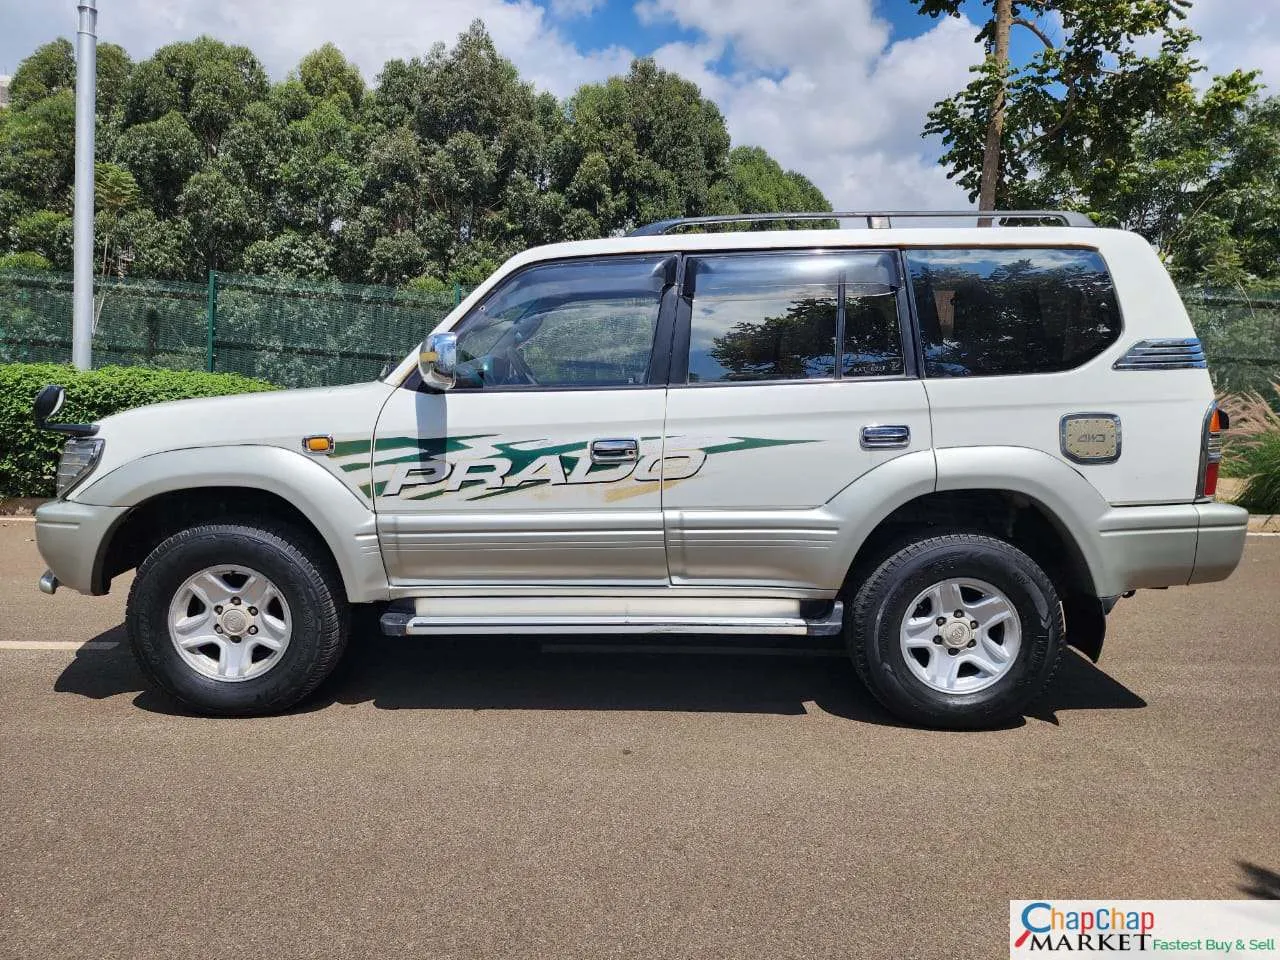 Toyota Prado 95 for sale in Kenya QUICK SALE You Pay 30% Deposit Trade in OK EXCLUSIVE